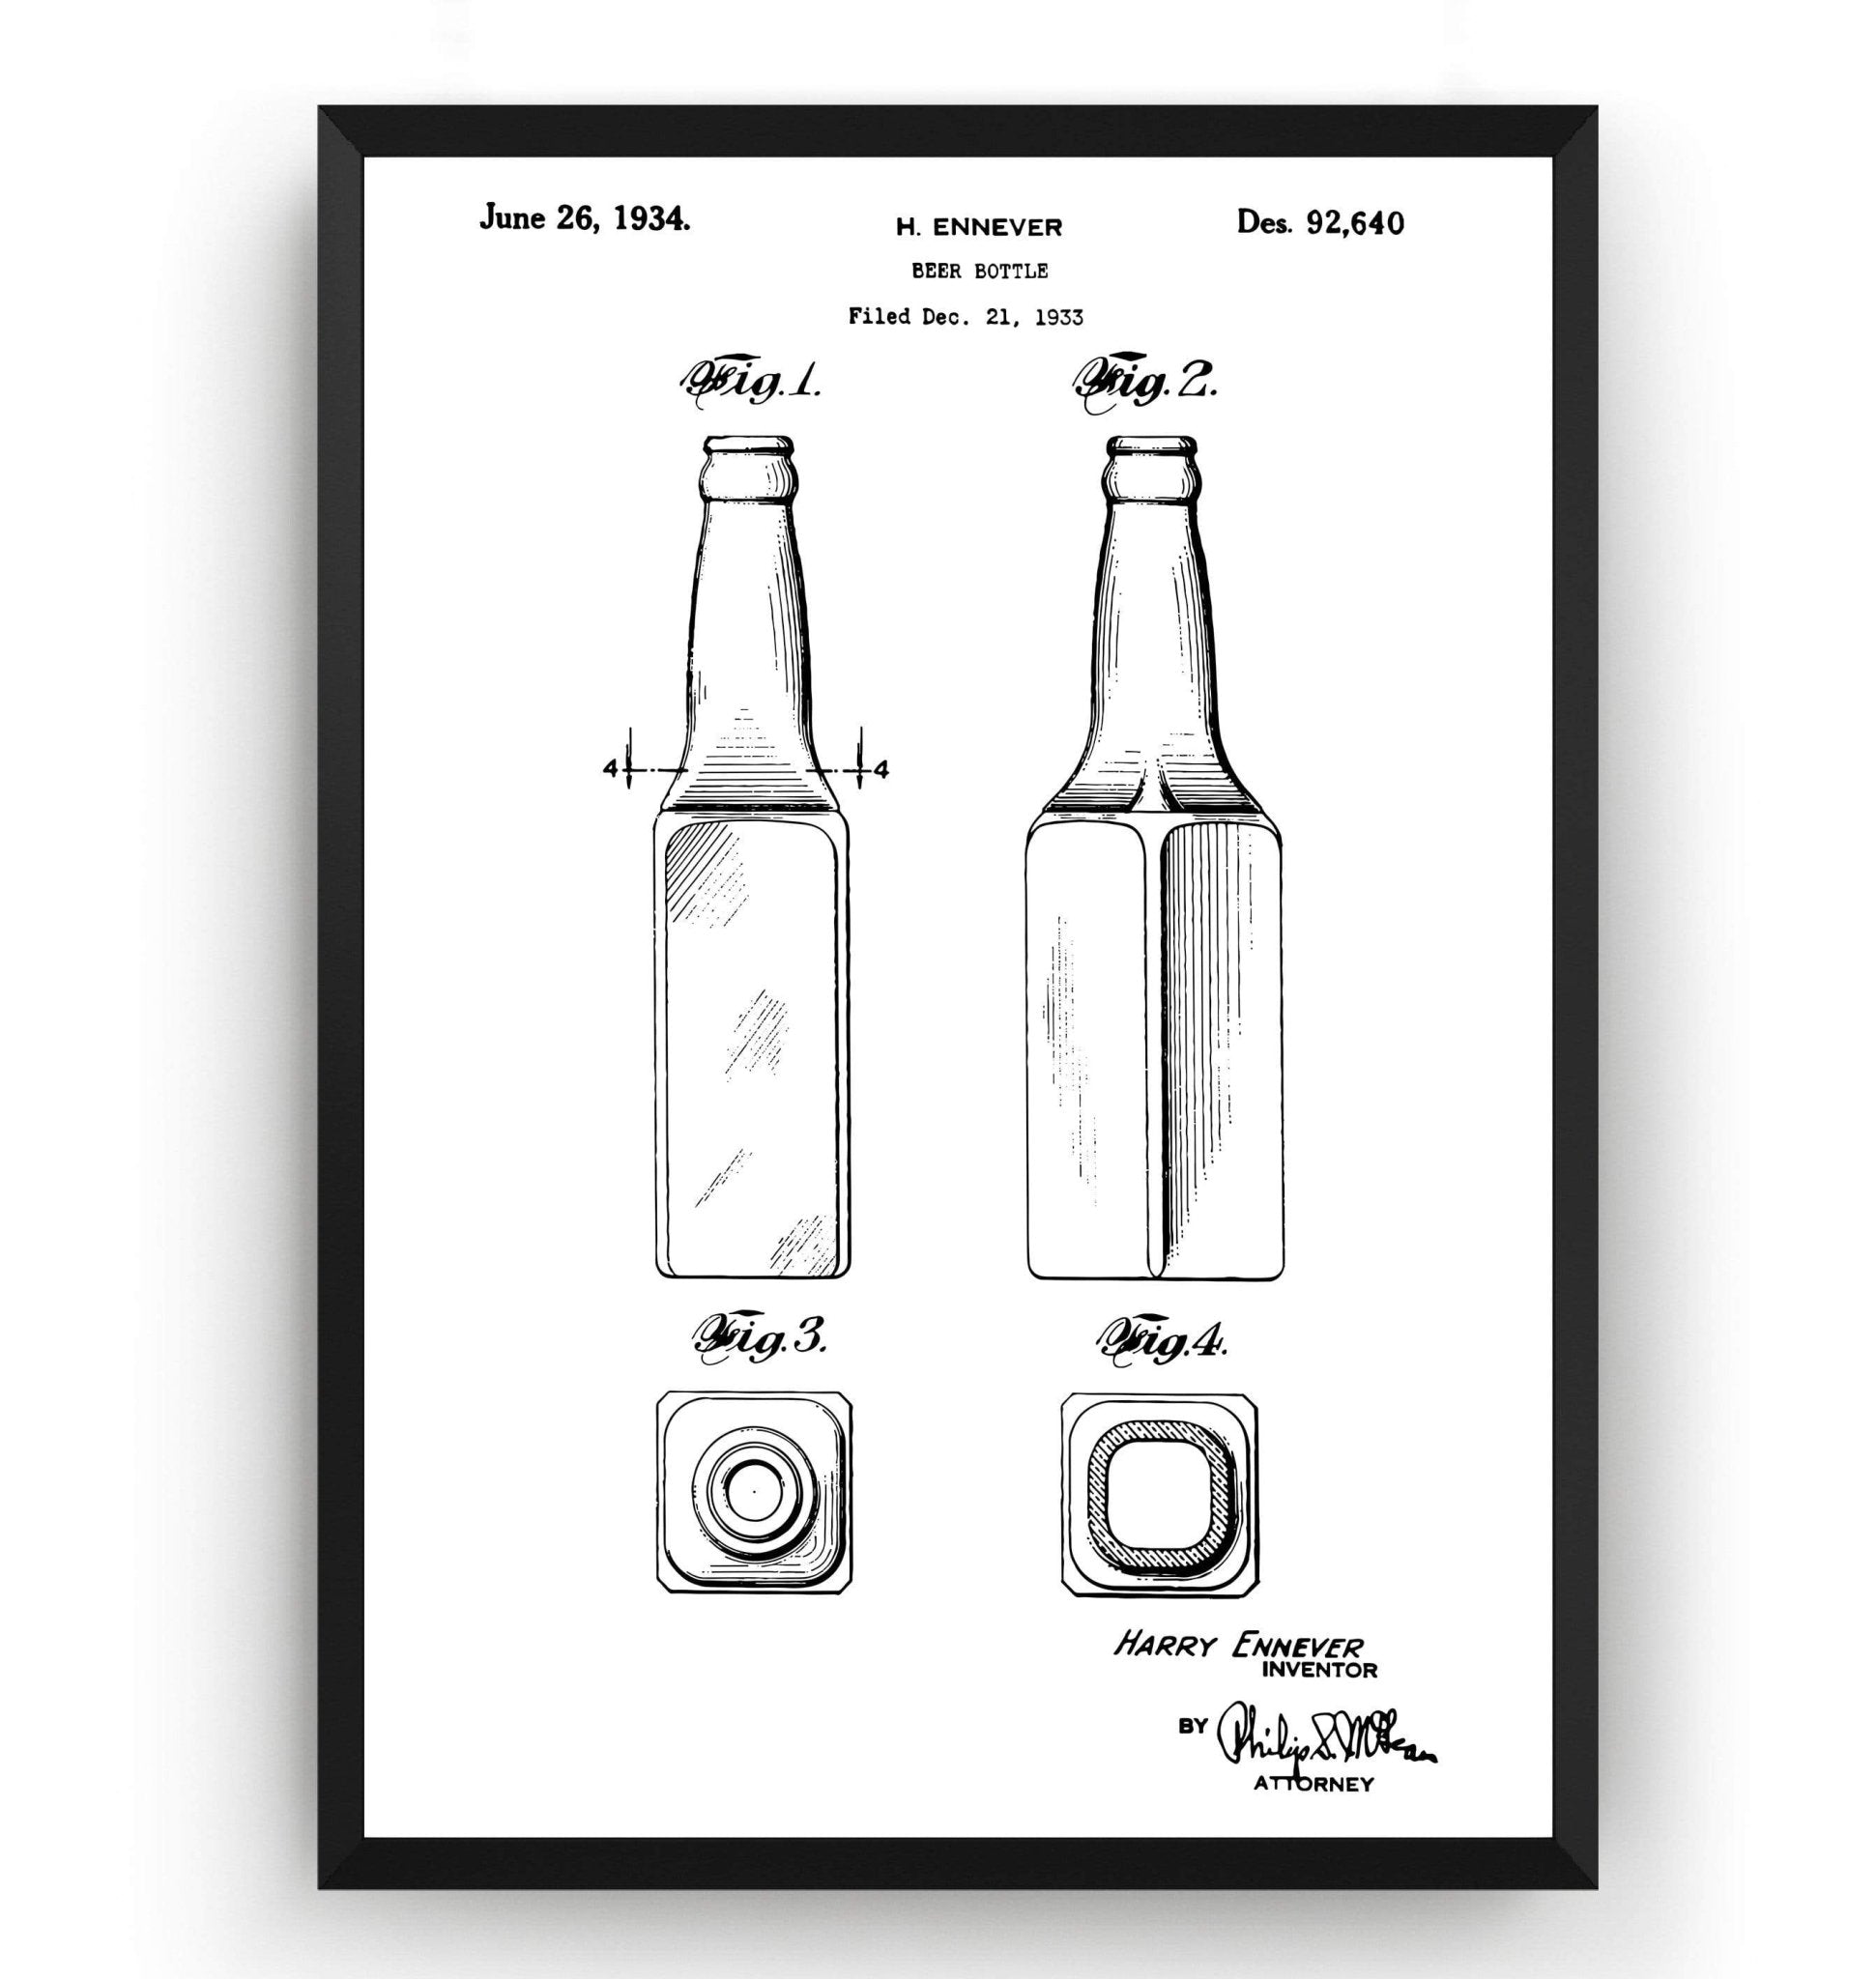 Beer Bottle 1934 Patent Print - Magic Posters